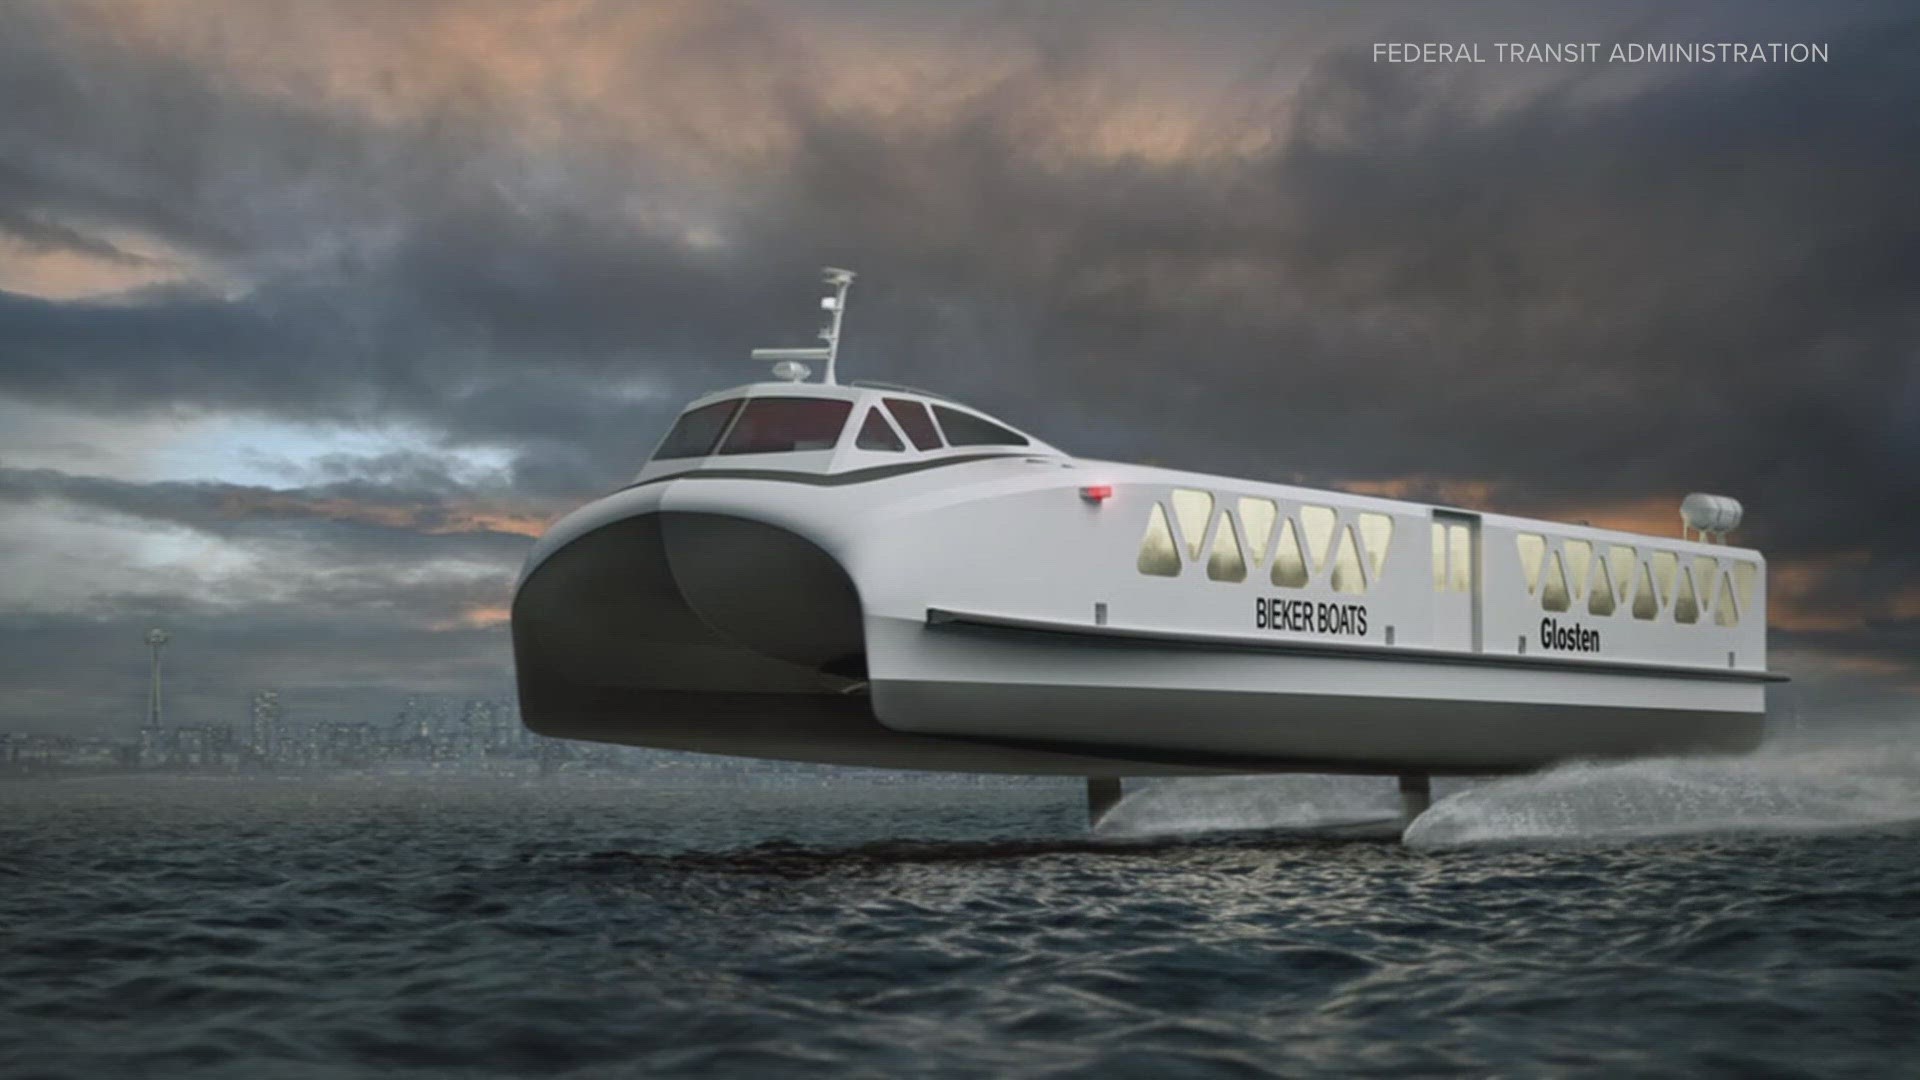 The ferry is being developed in hopes of creating a zero-emission vessel and reducing wake.